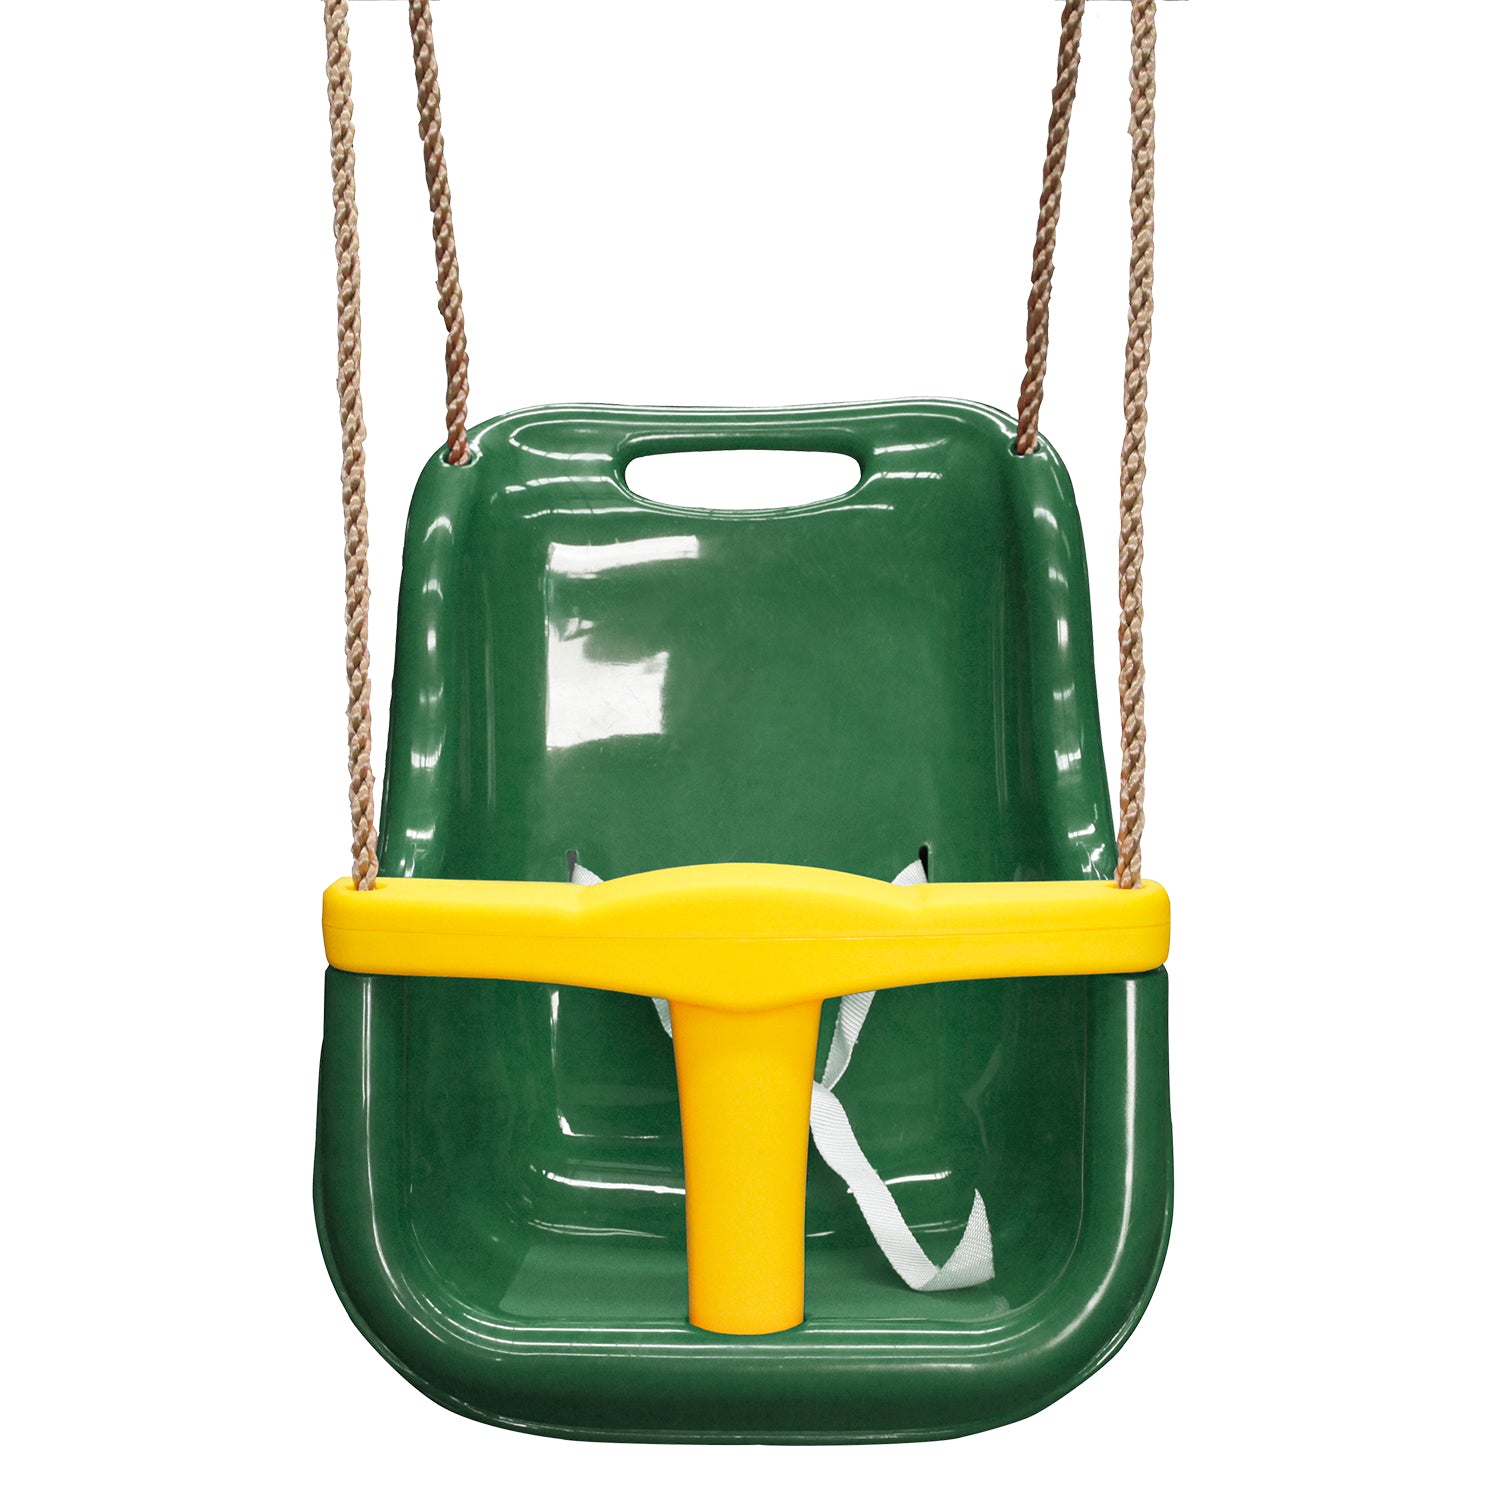 Lifespan Kids Baby Swing Seat Green with Rope Extensions